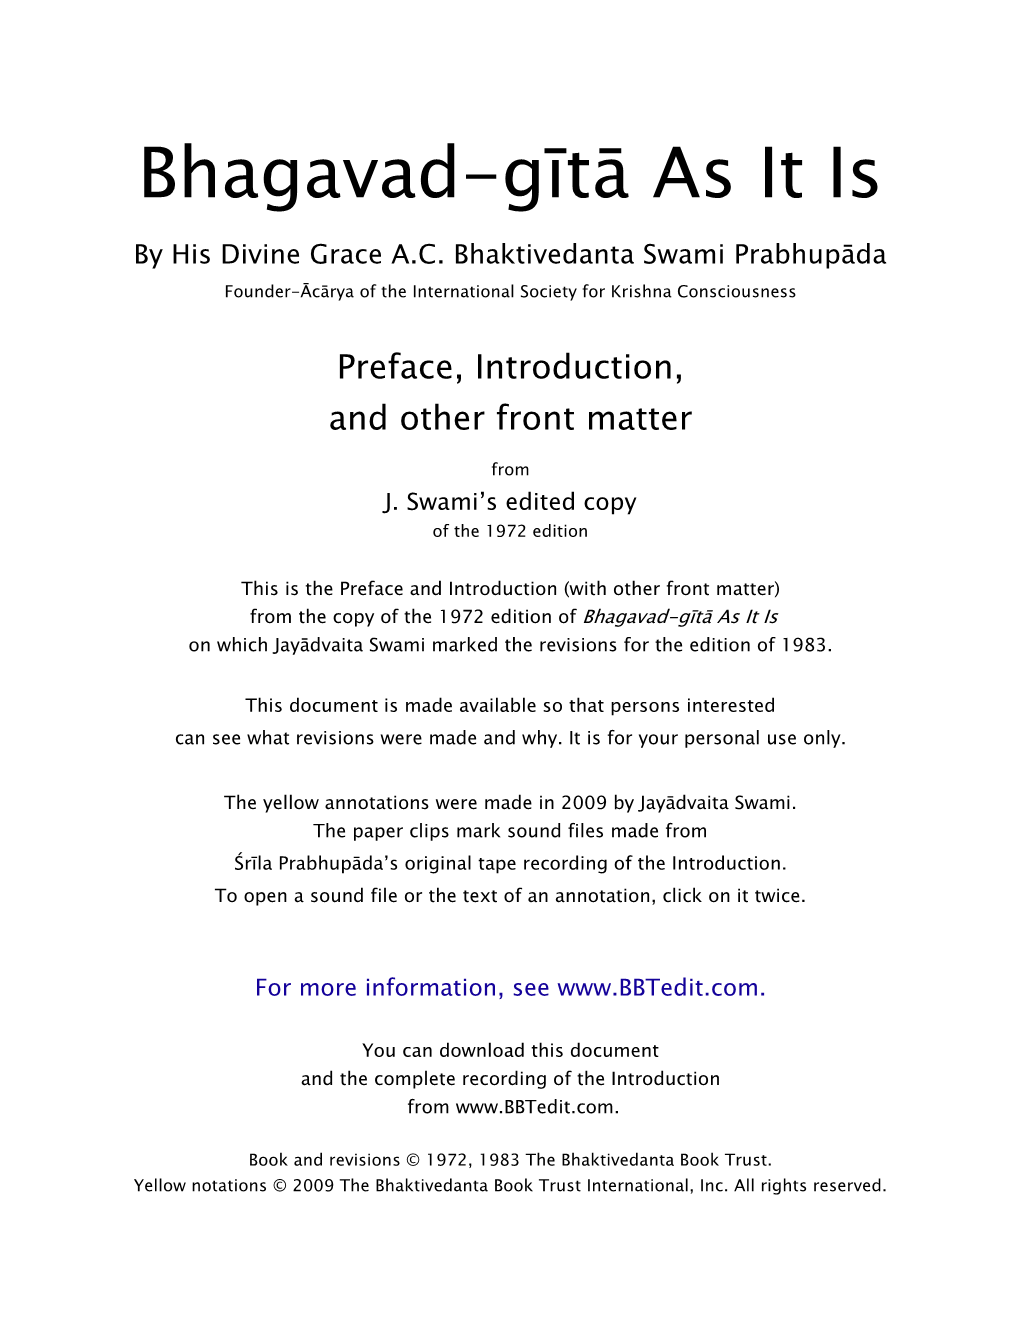 Bhagavad-Gita As It Is, Preface and Intro, 72 Gita Showing Revisions